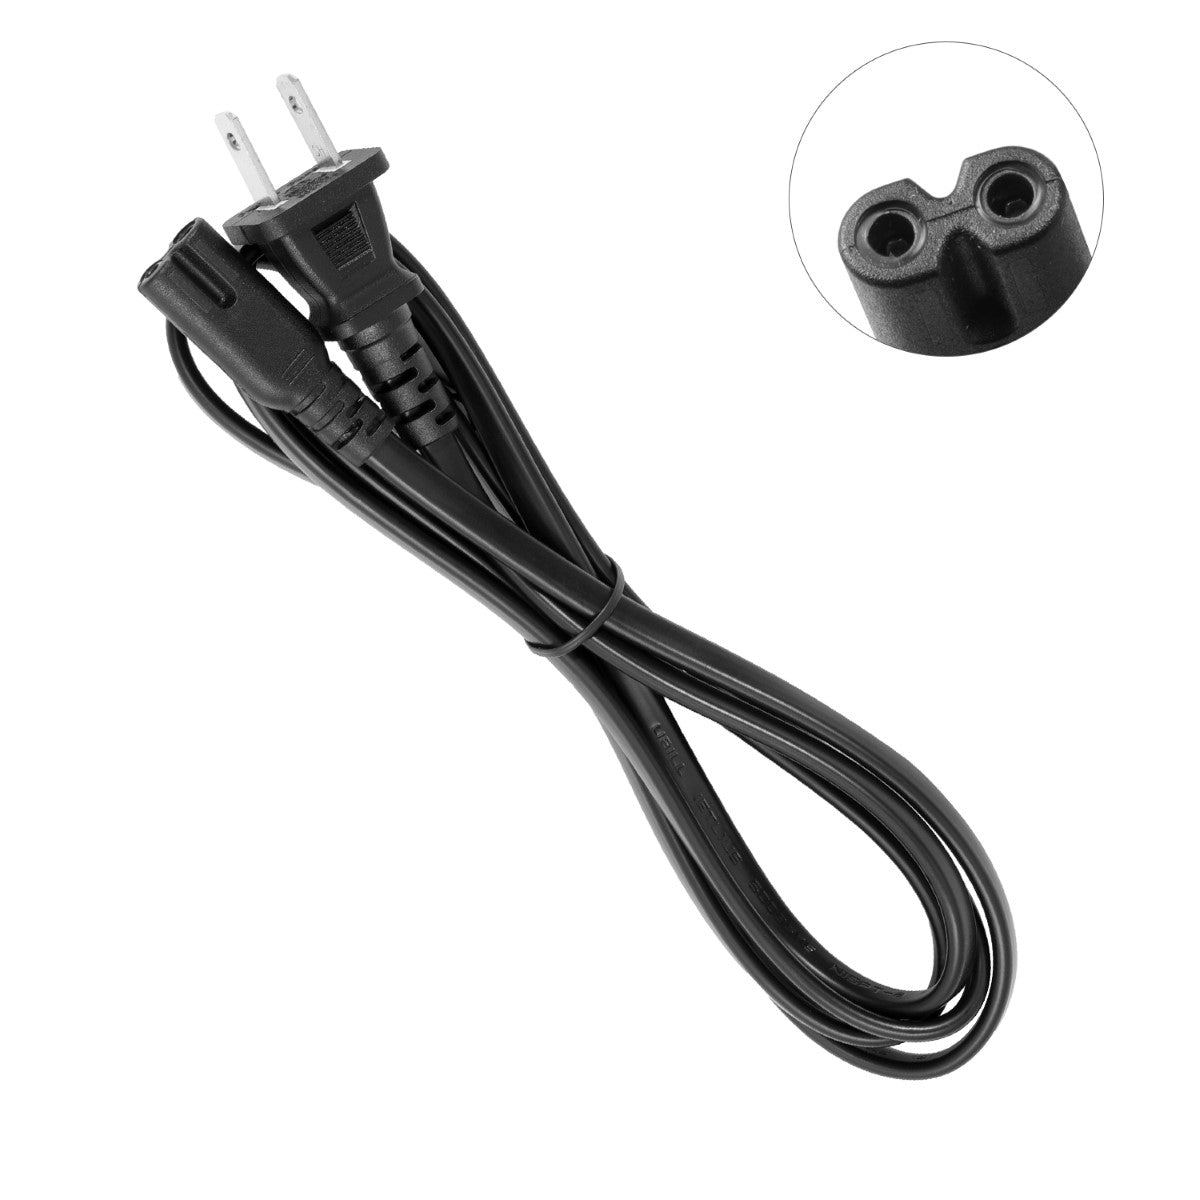 Power Cable for HP Officejet 4610 All-in-One Printer.